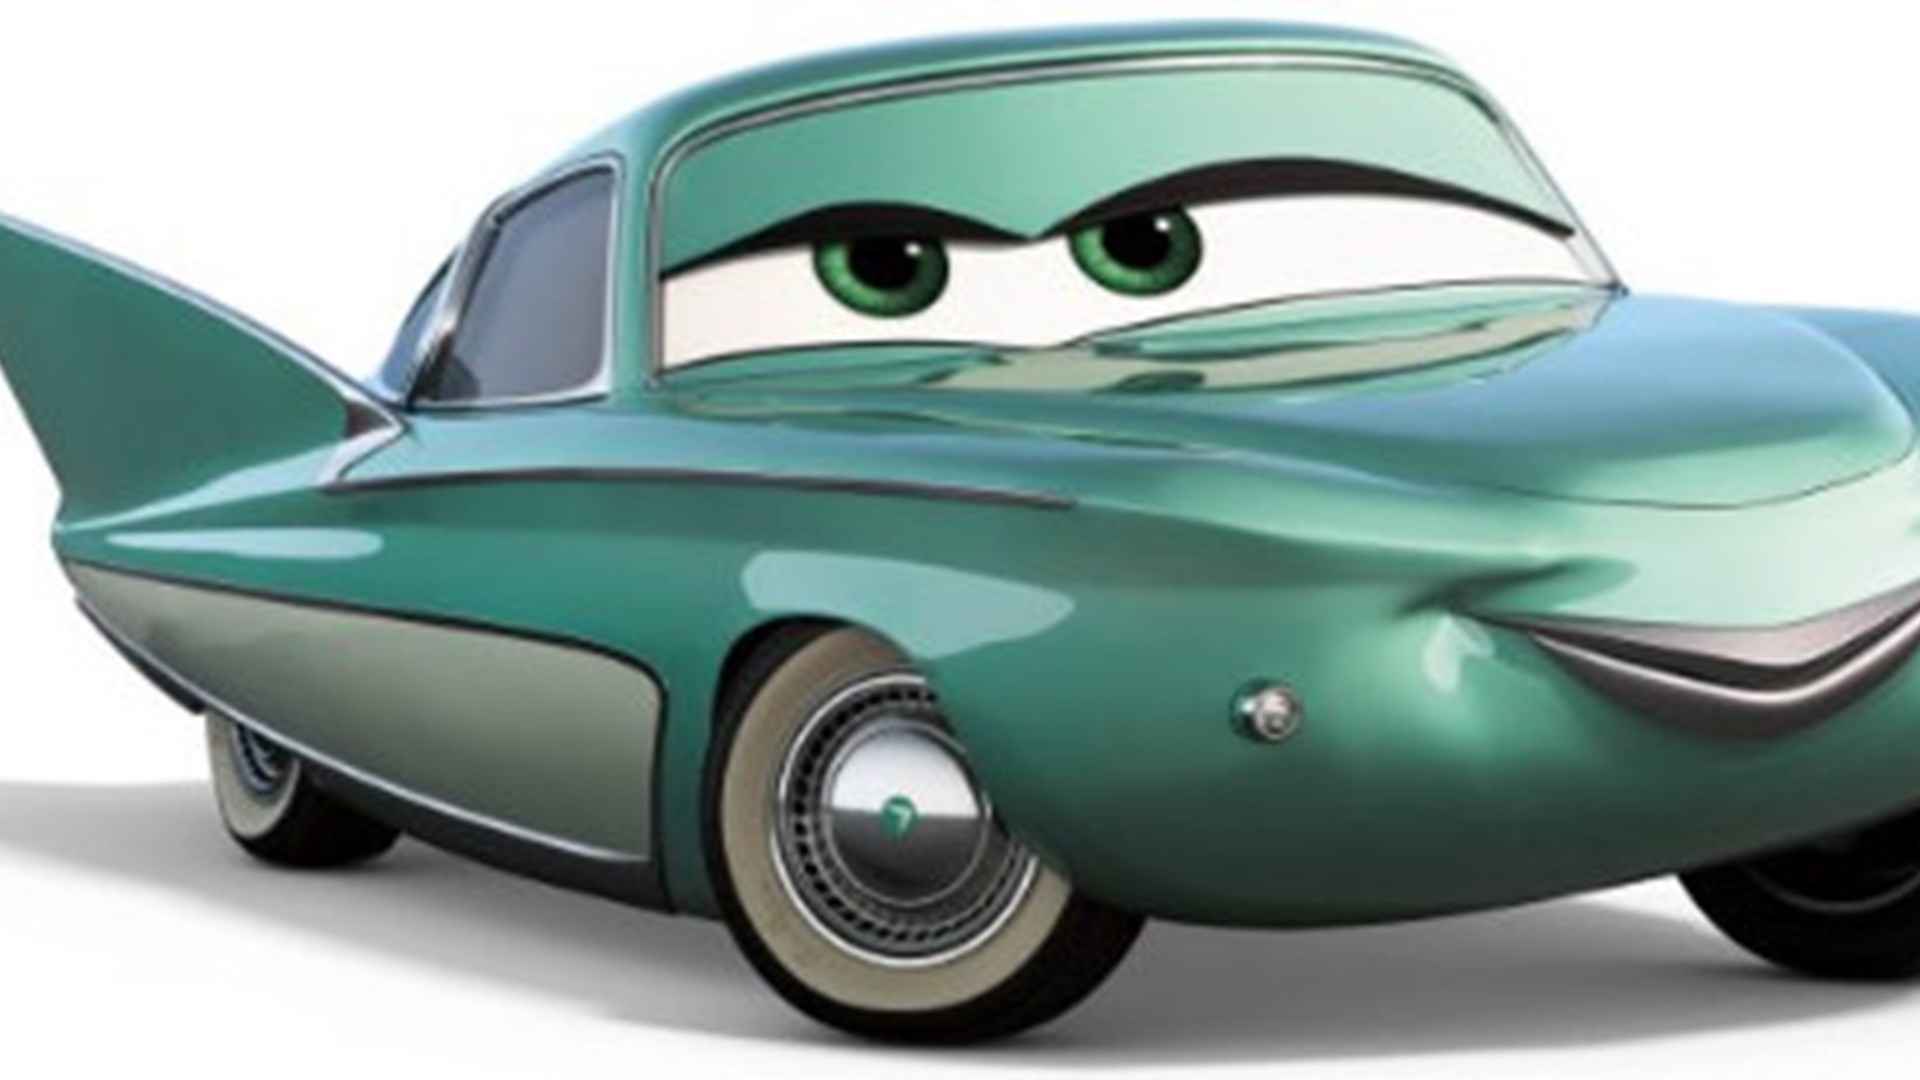 Identifying the Cars of Cars 3.